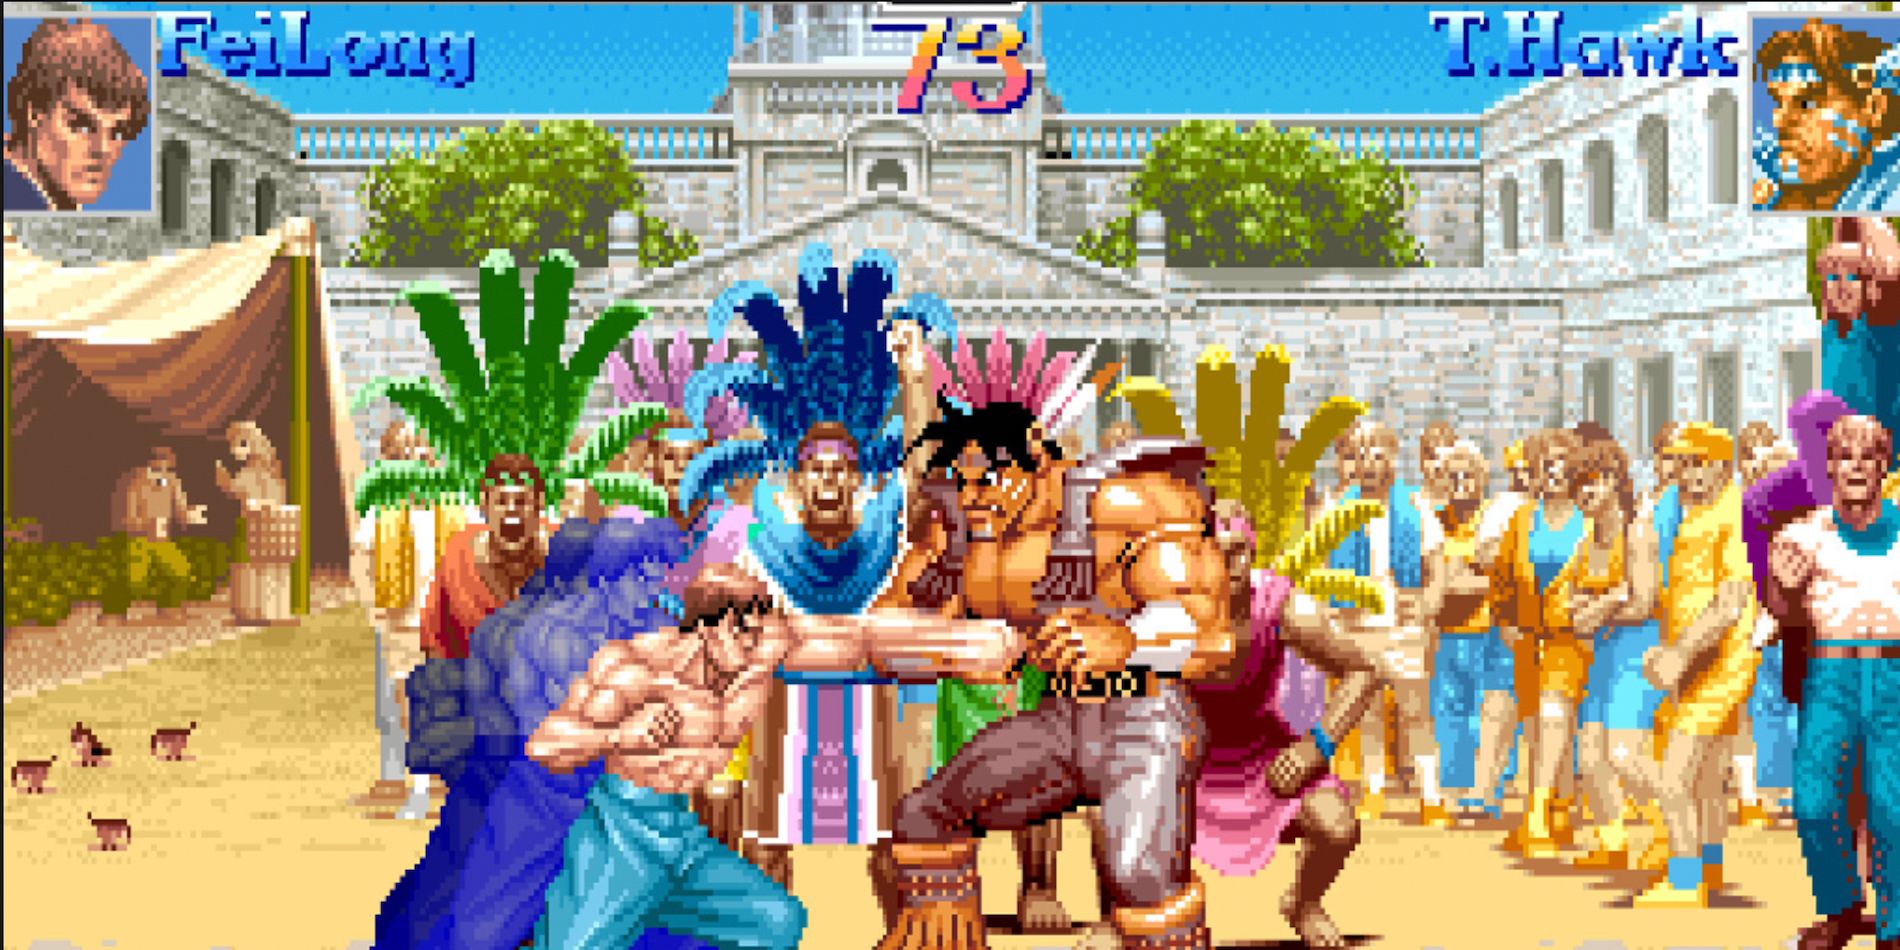 A fight between Fei-Long and T. Hawk from Super Street Fighter II Turbo